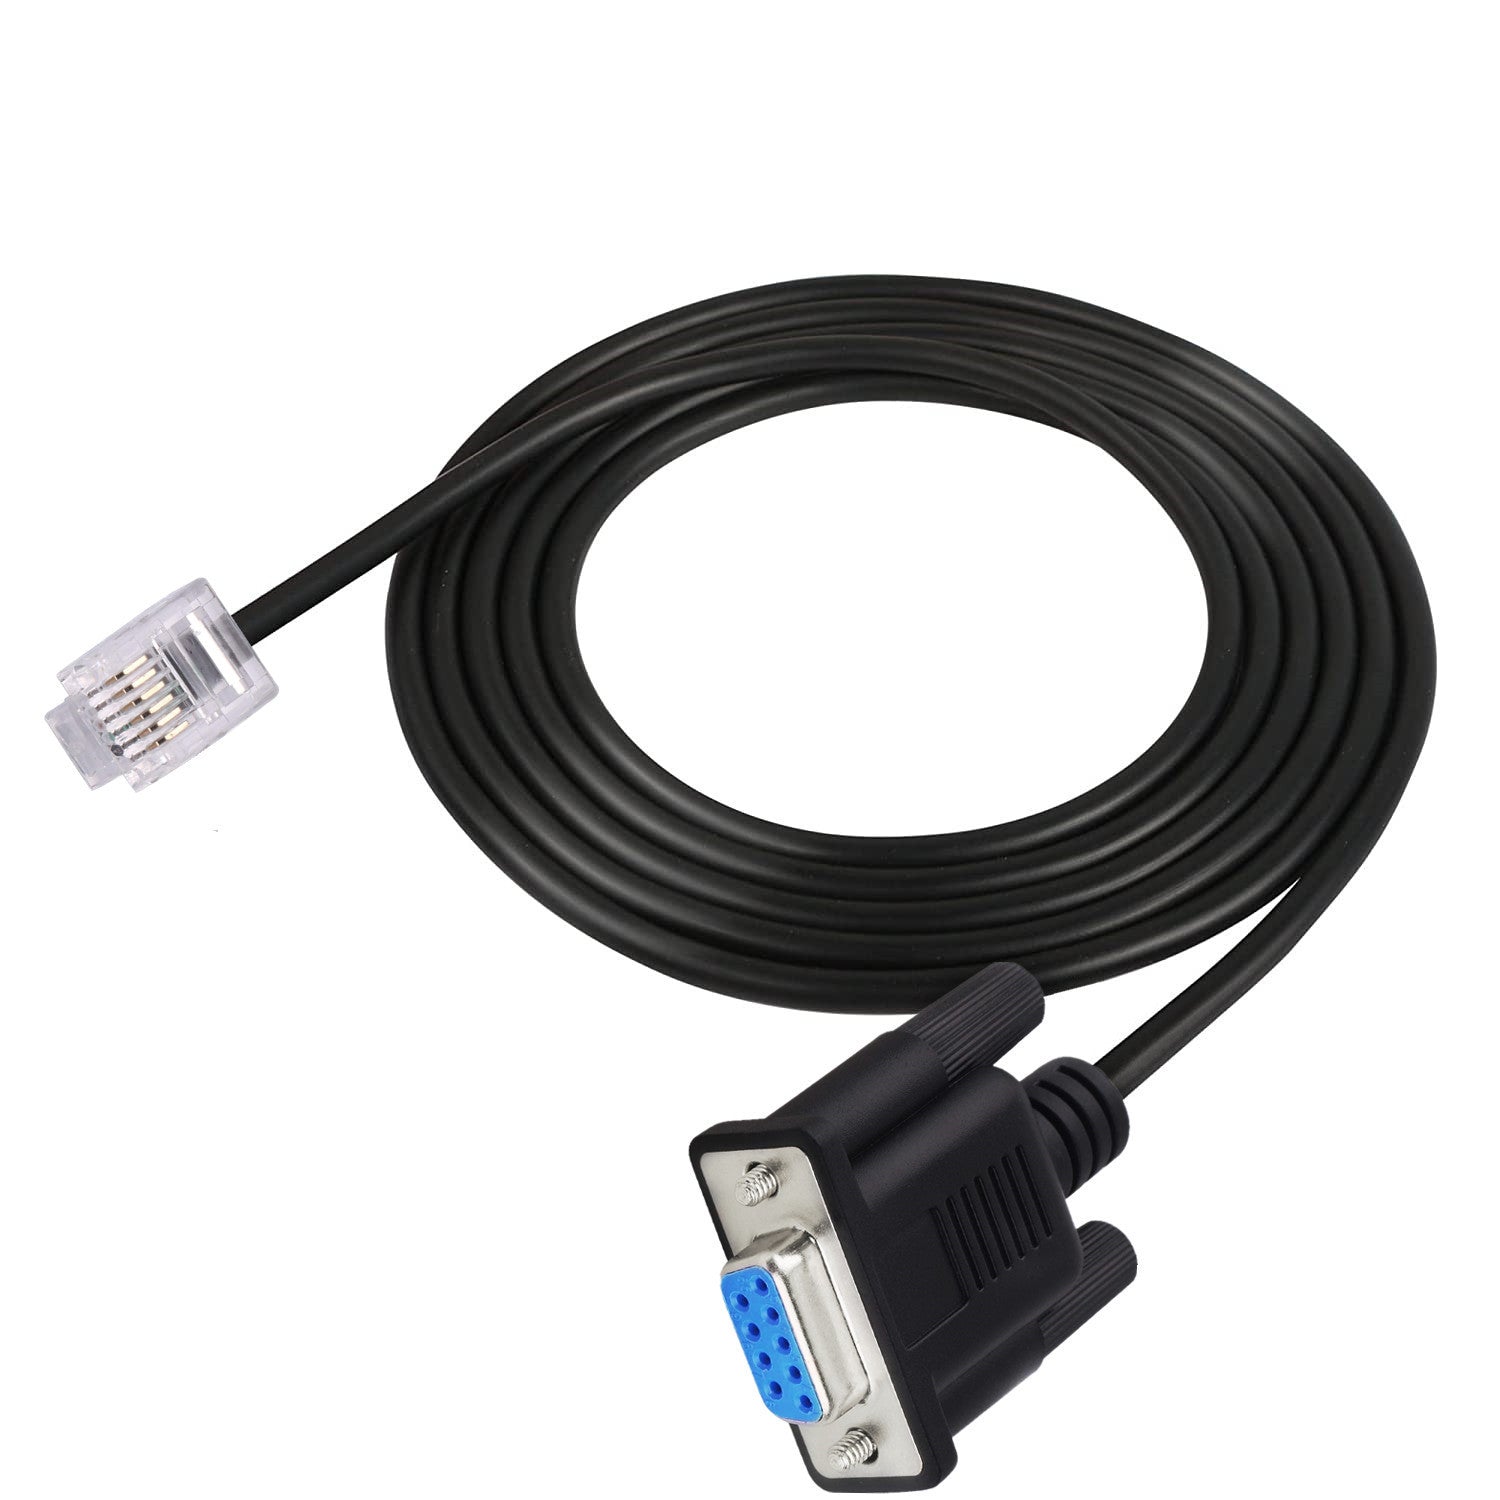 DB9 to RJ11 RJ12 6P6C Lan Network Serial Console Cable